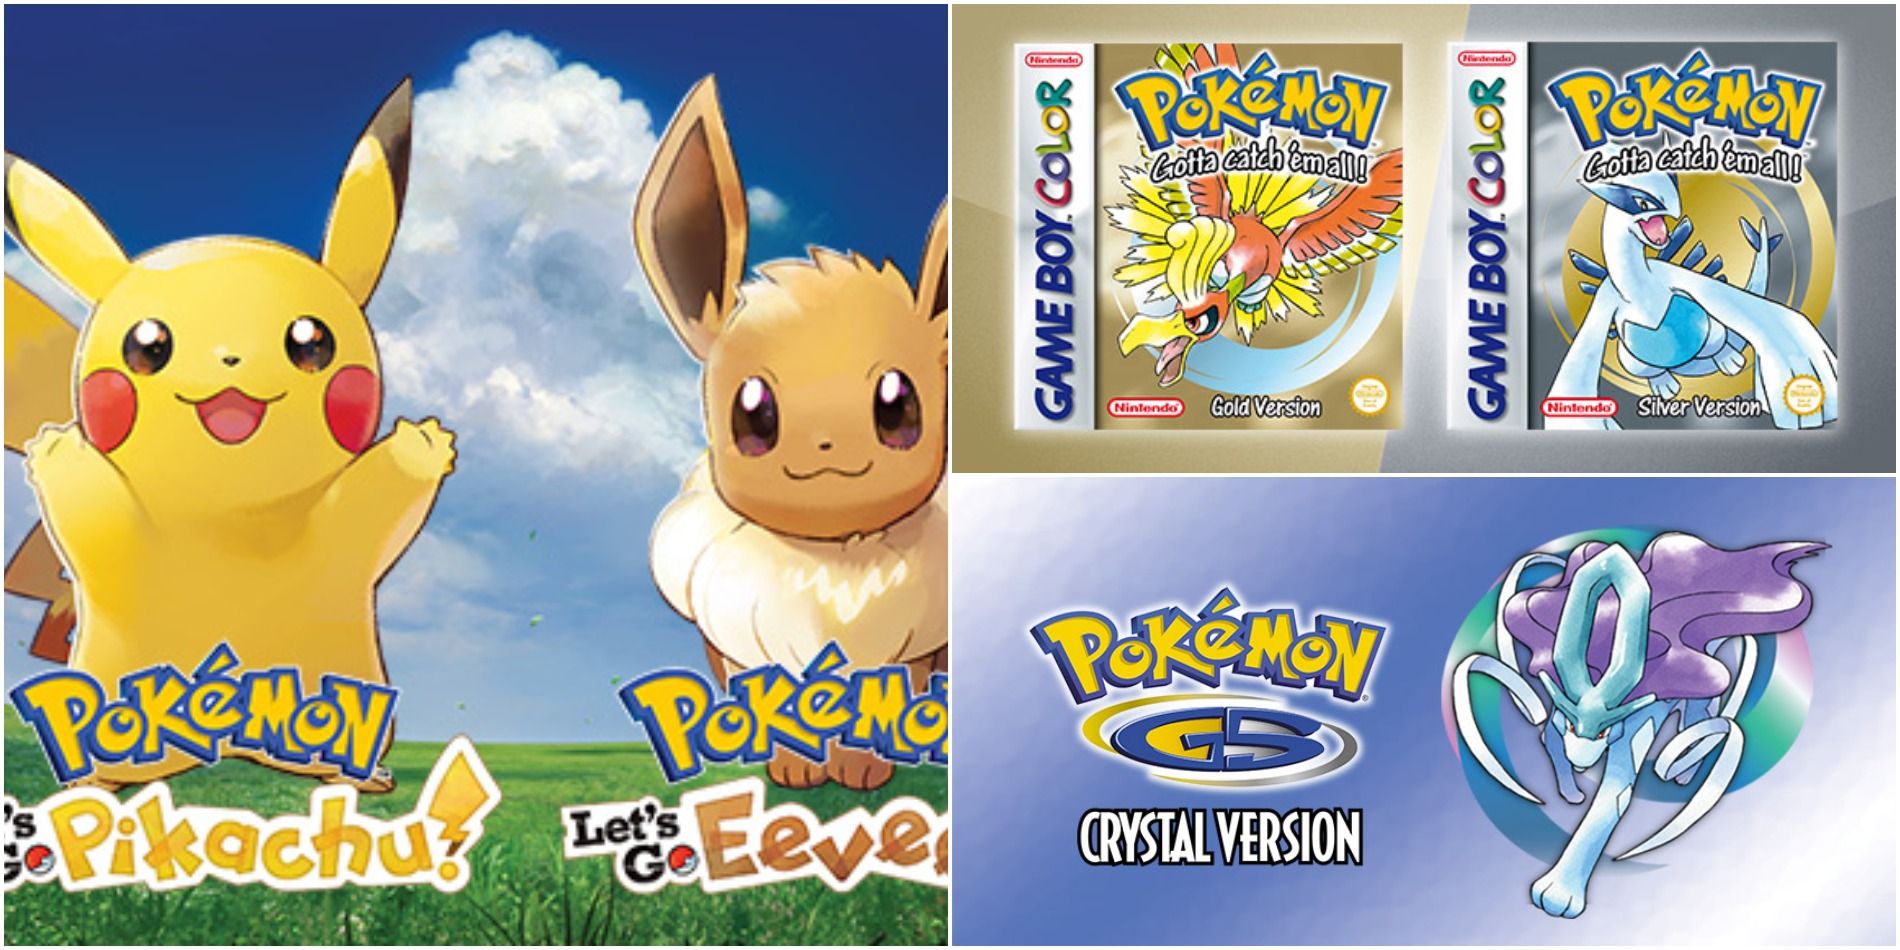 Pokémon Let's Go, Pikachu! and Eevee! and Gold, Silver and Crystal